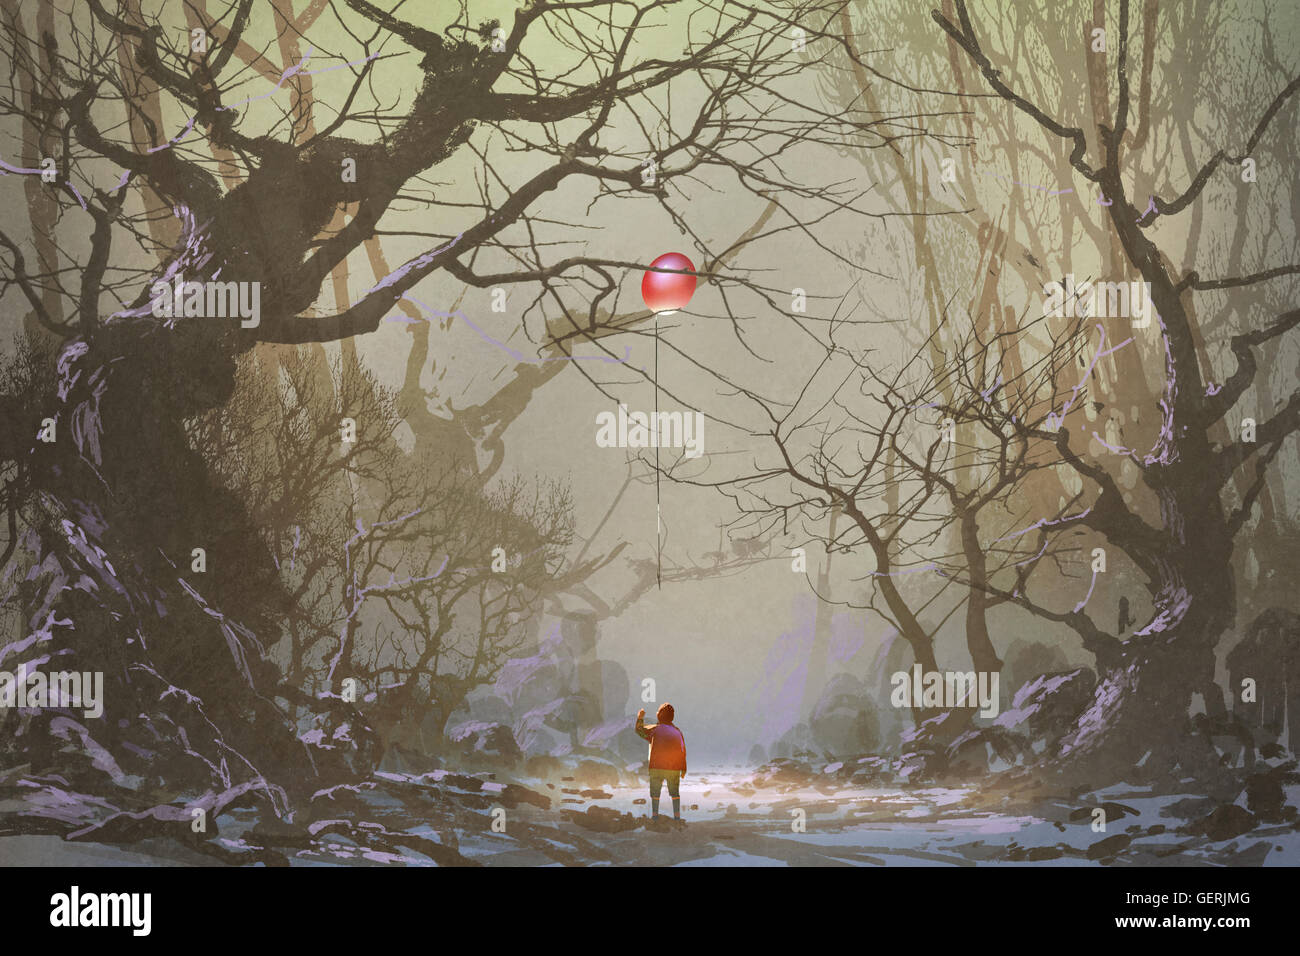 boy looking up red balloon stuck in a tree branches,alone in dark forest,illustration,digital painting Stock Photo